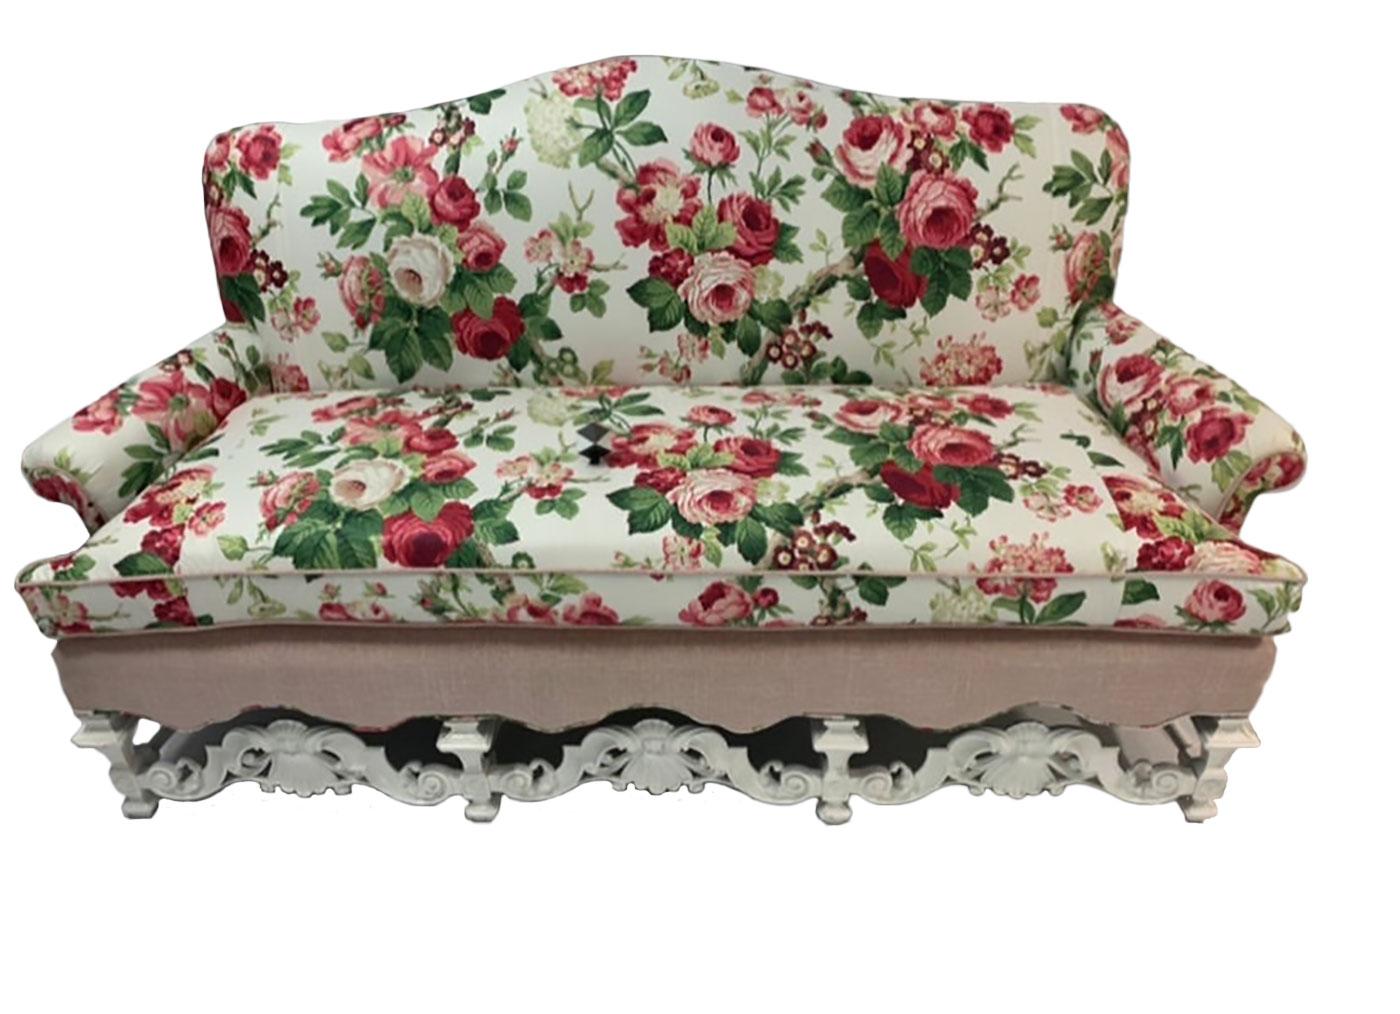 20th century William & Mary style arched back sofa with highly carved front stretcher with scroll and fan motif. The sofa has rolled arms and consists of a single seat cushion reupholstered in Schumacher Chintz and a complimentary pink woven fabric.